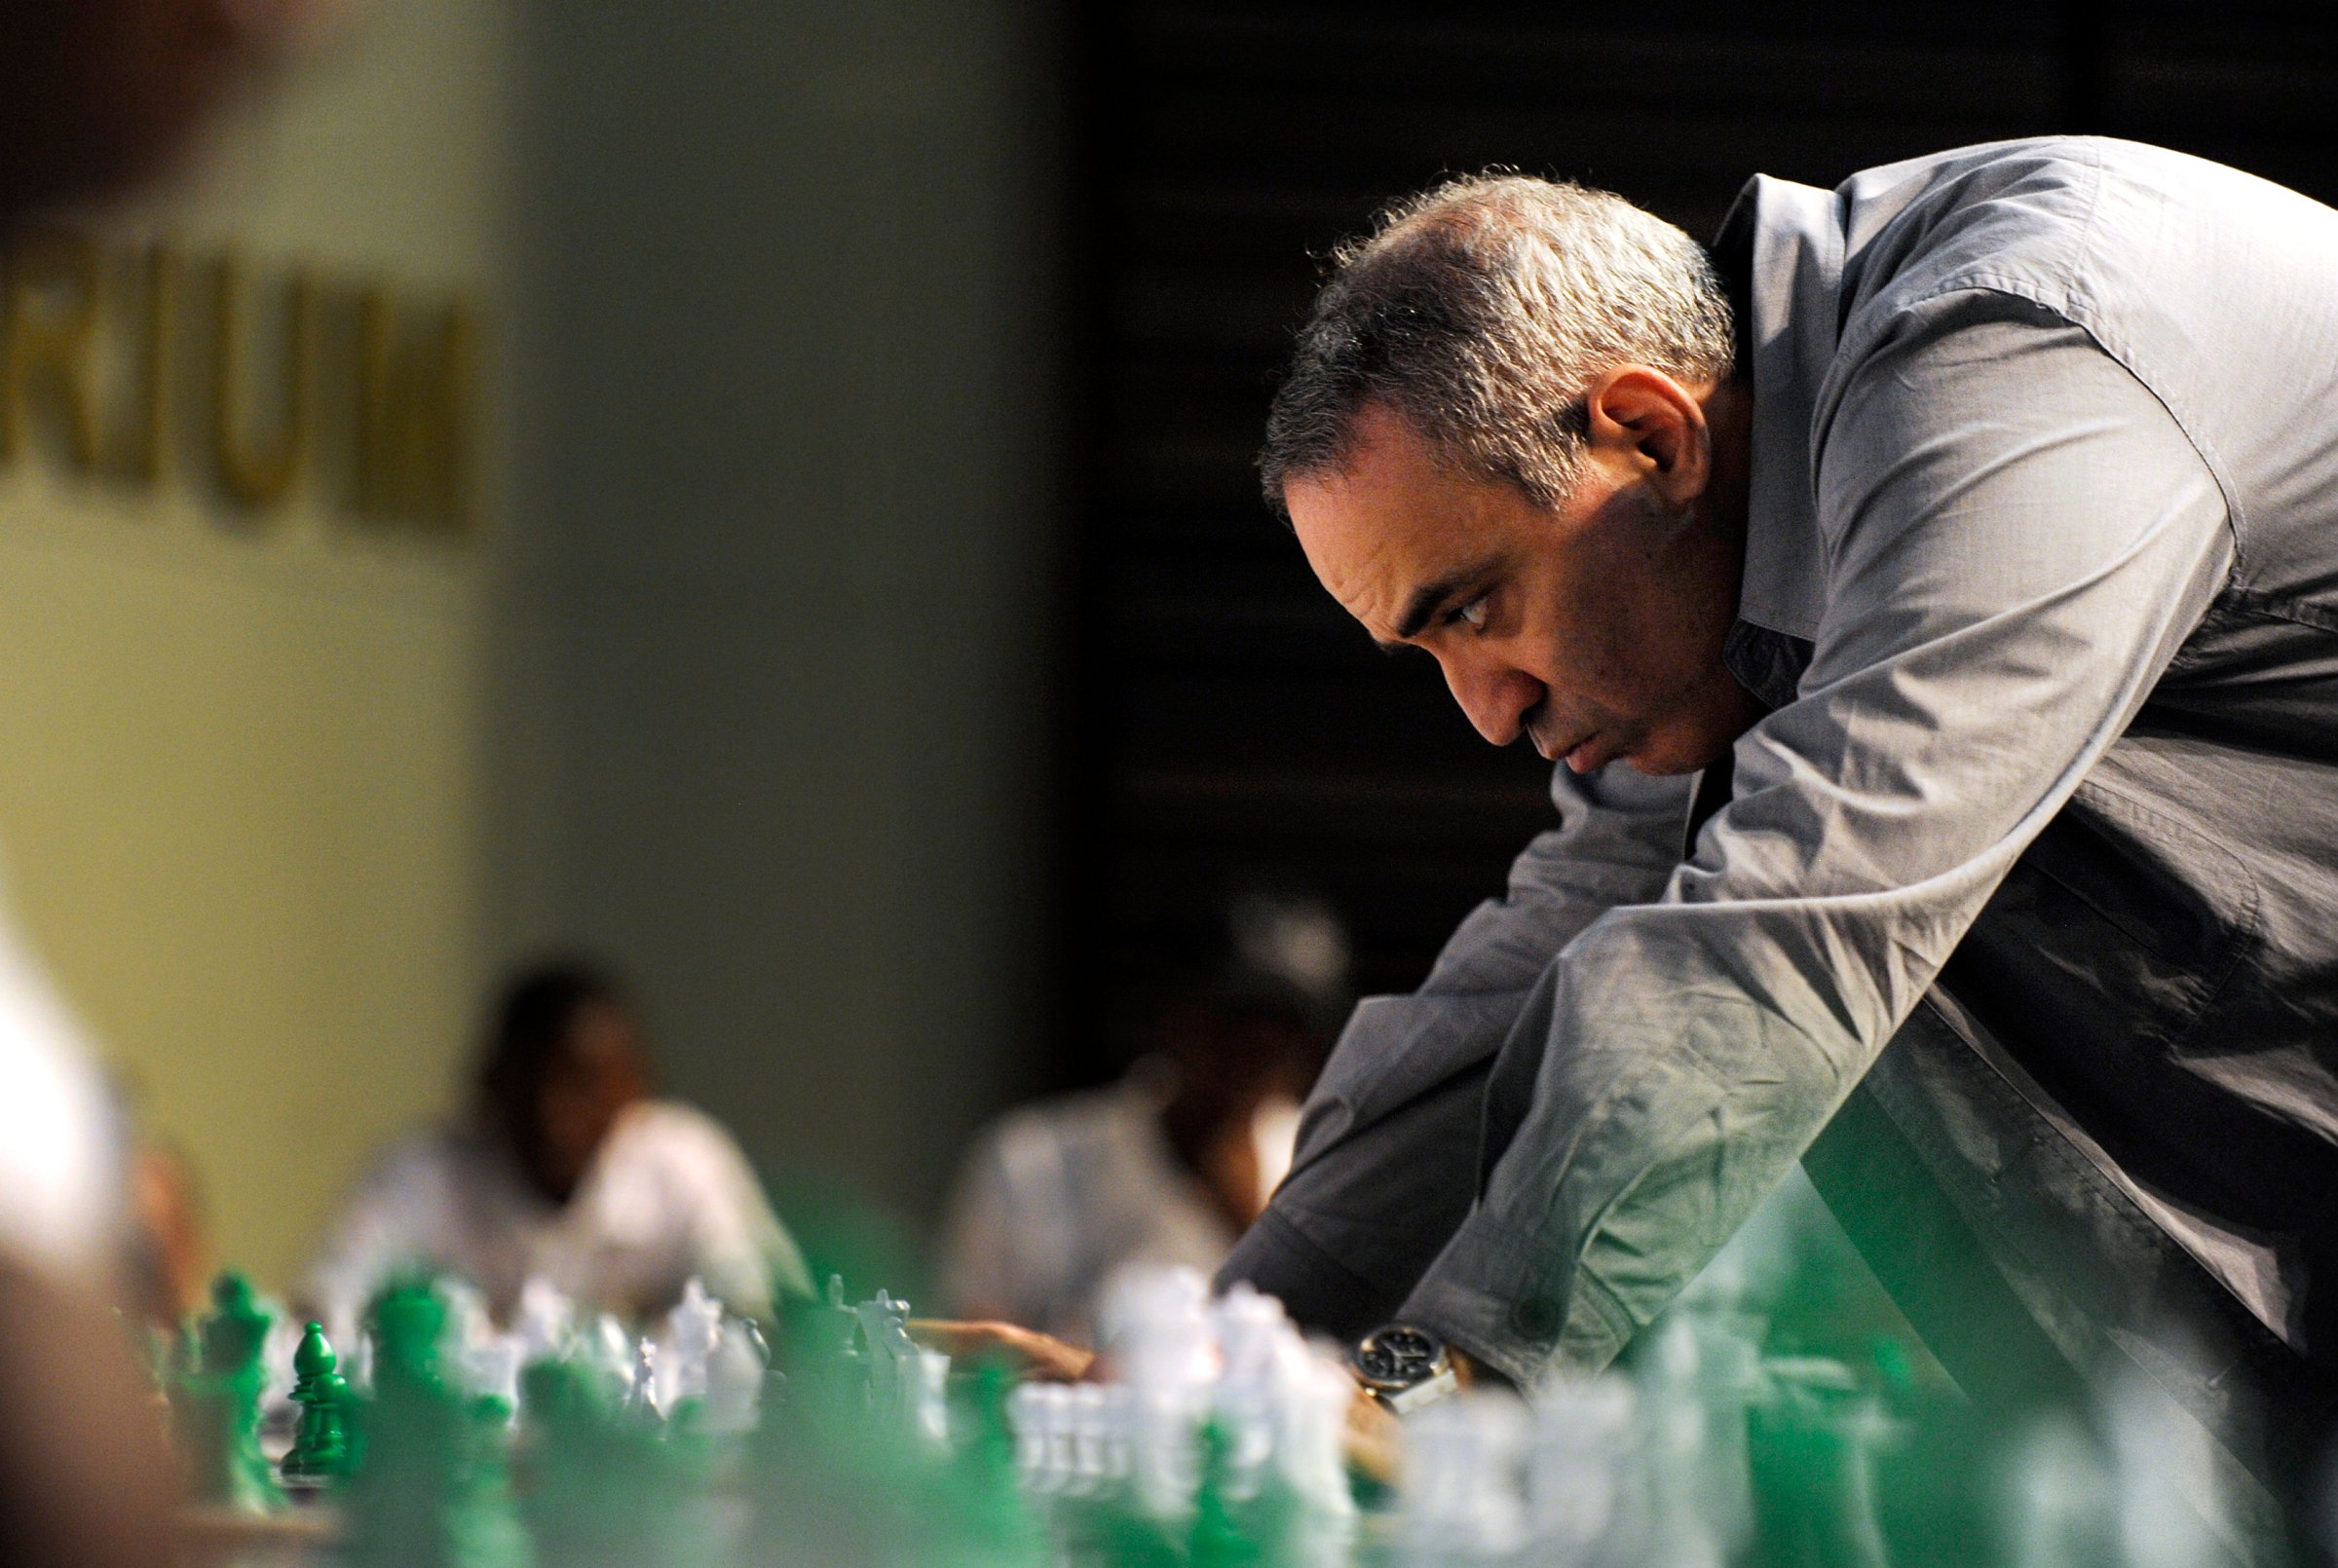 Former World Chess Champion Garry Kasparov plays a game of chess with school children on March 25, 2012 in Pretoria, South Africa.